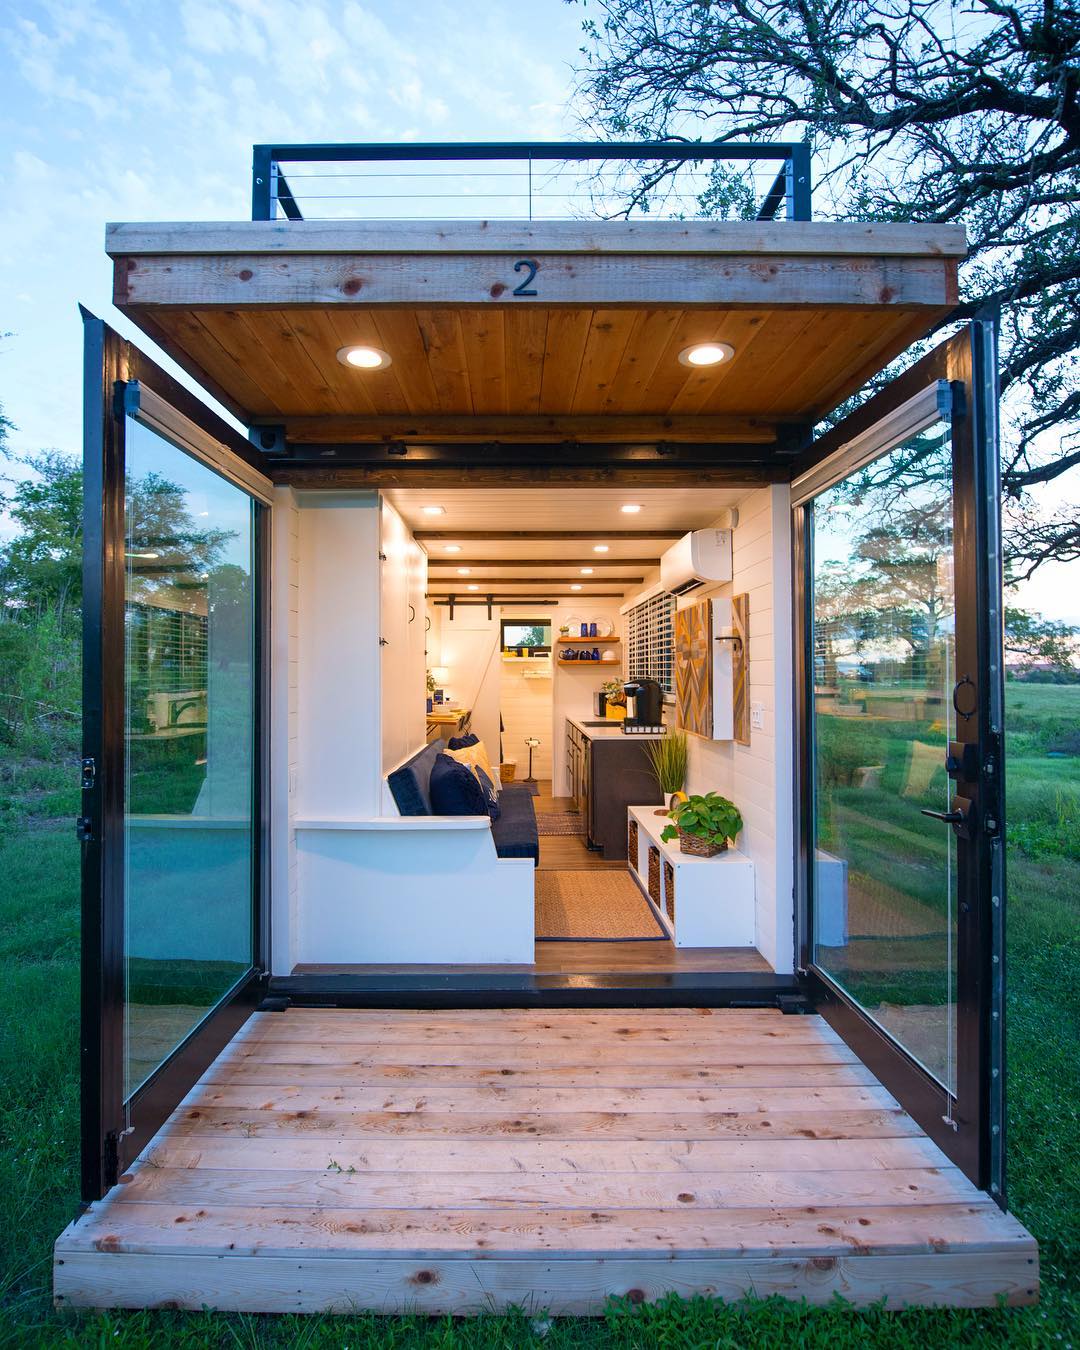 Tiny home porch with giant glass doors. Photo by Instagram user @cargo_home